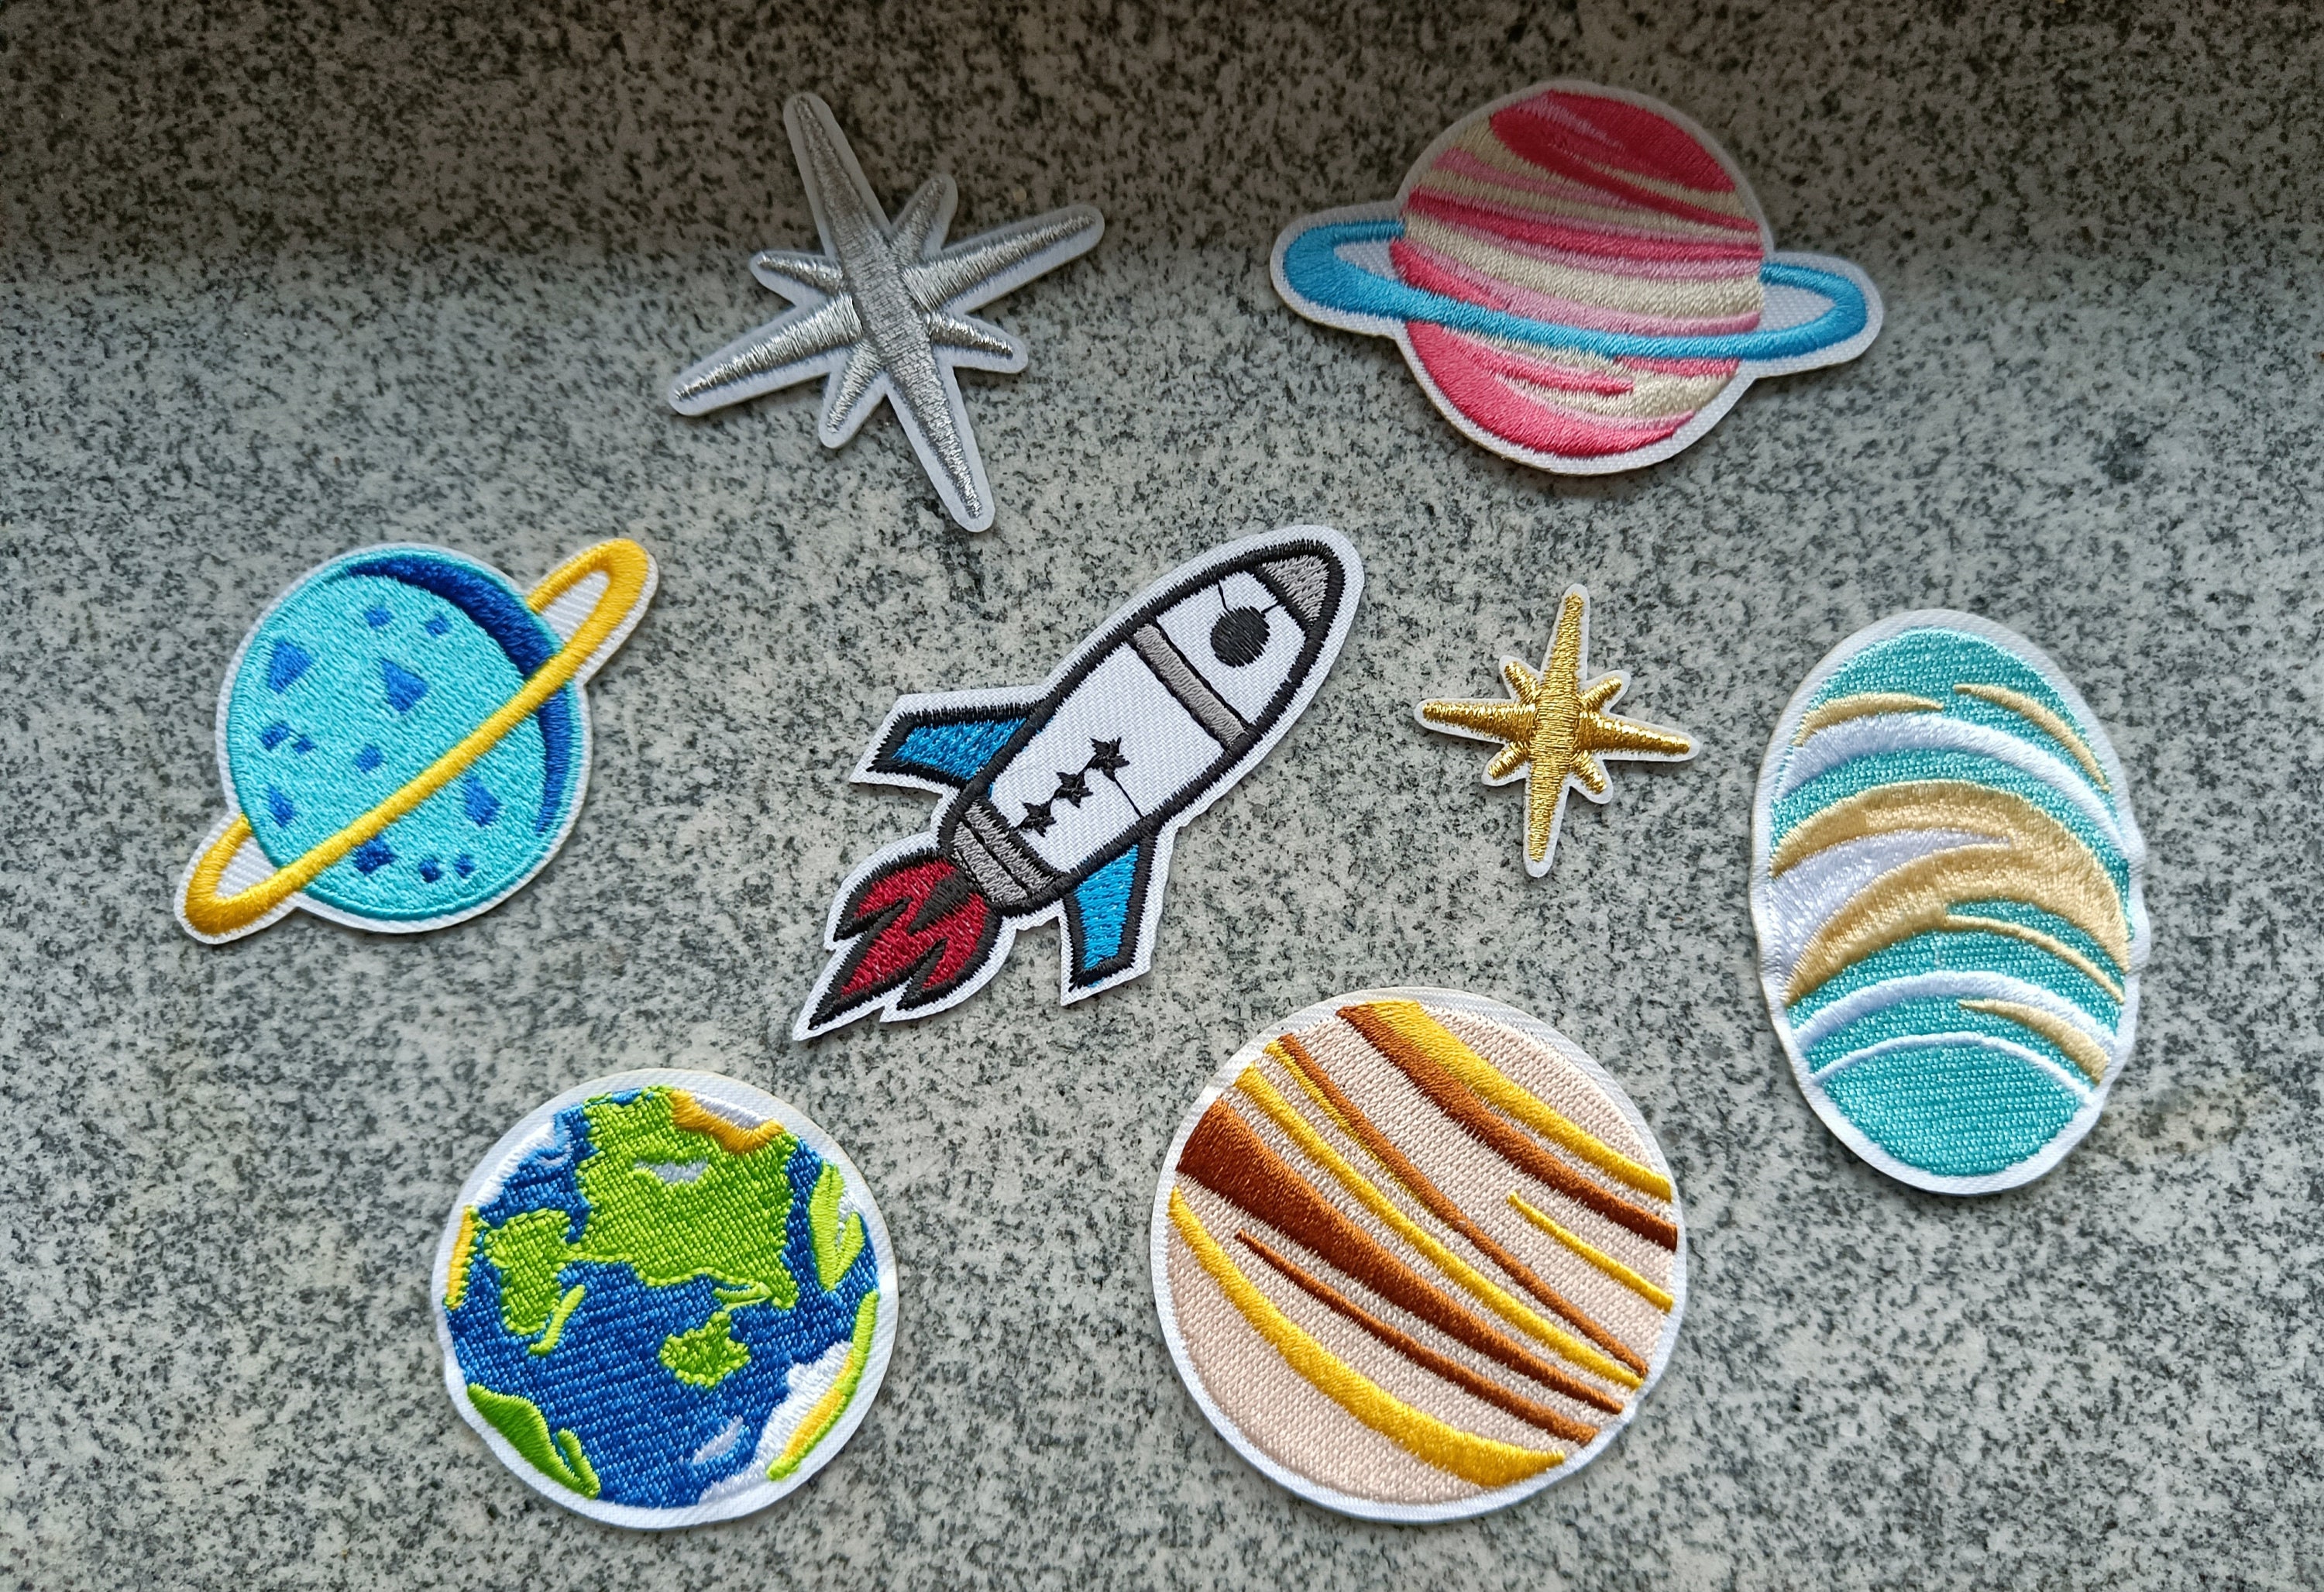  Iron On Denim Patches Solar System Space Planets Animal Sewing  Knee Repair Patches Embroidery Applique Patches for Clothing Jeans and DIY  Repair 12 PCS : Everything Else